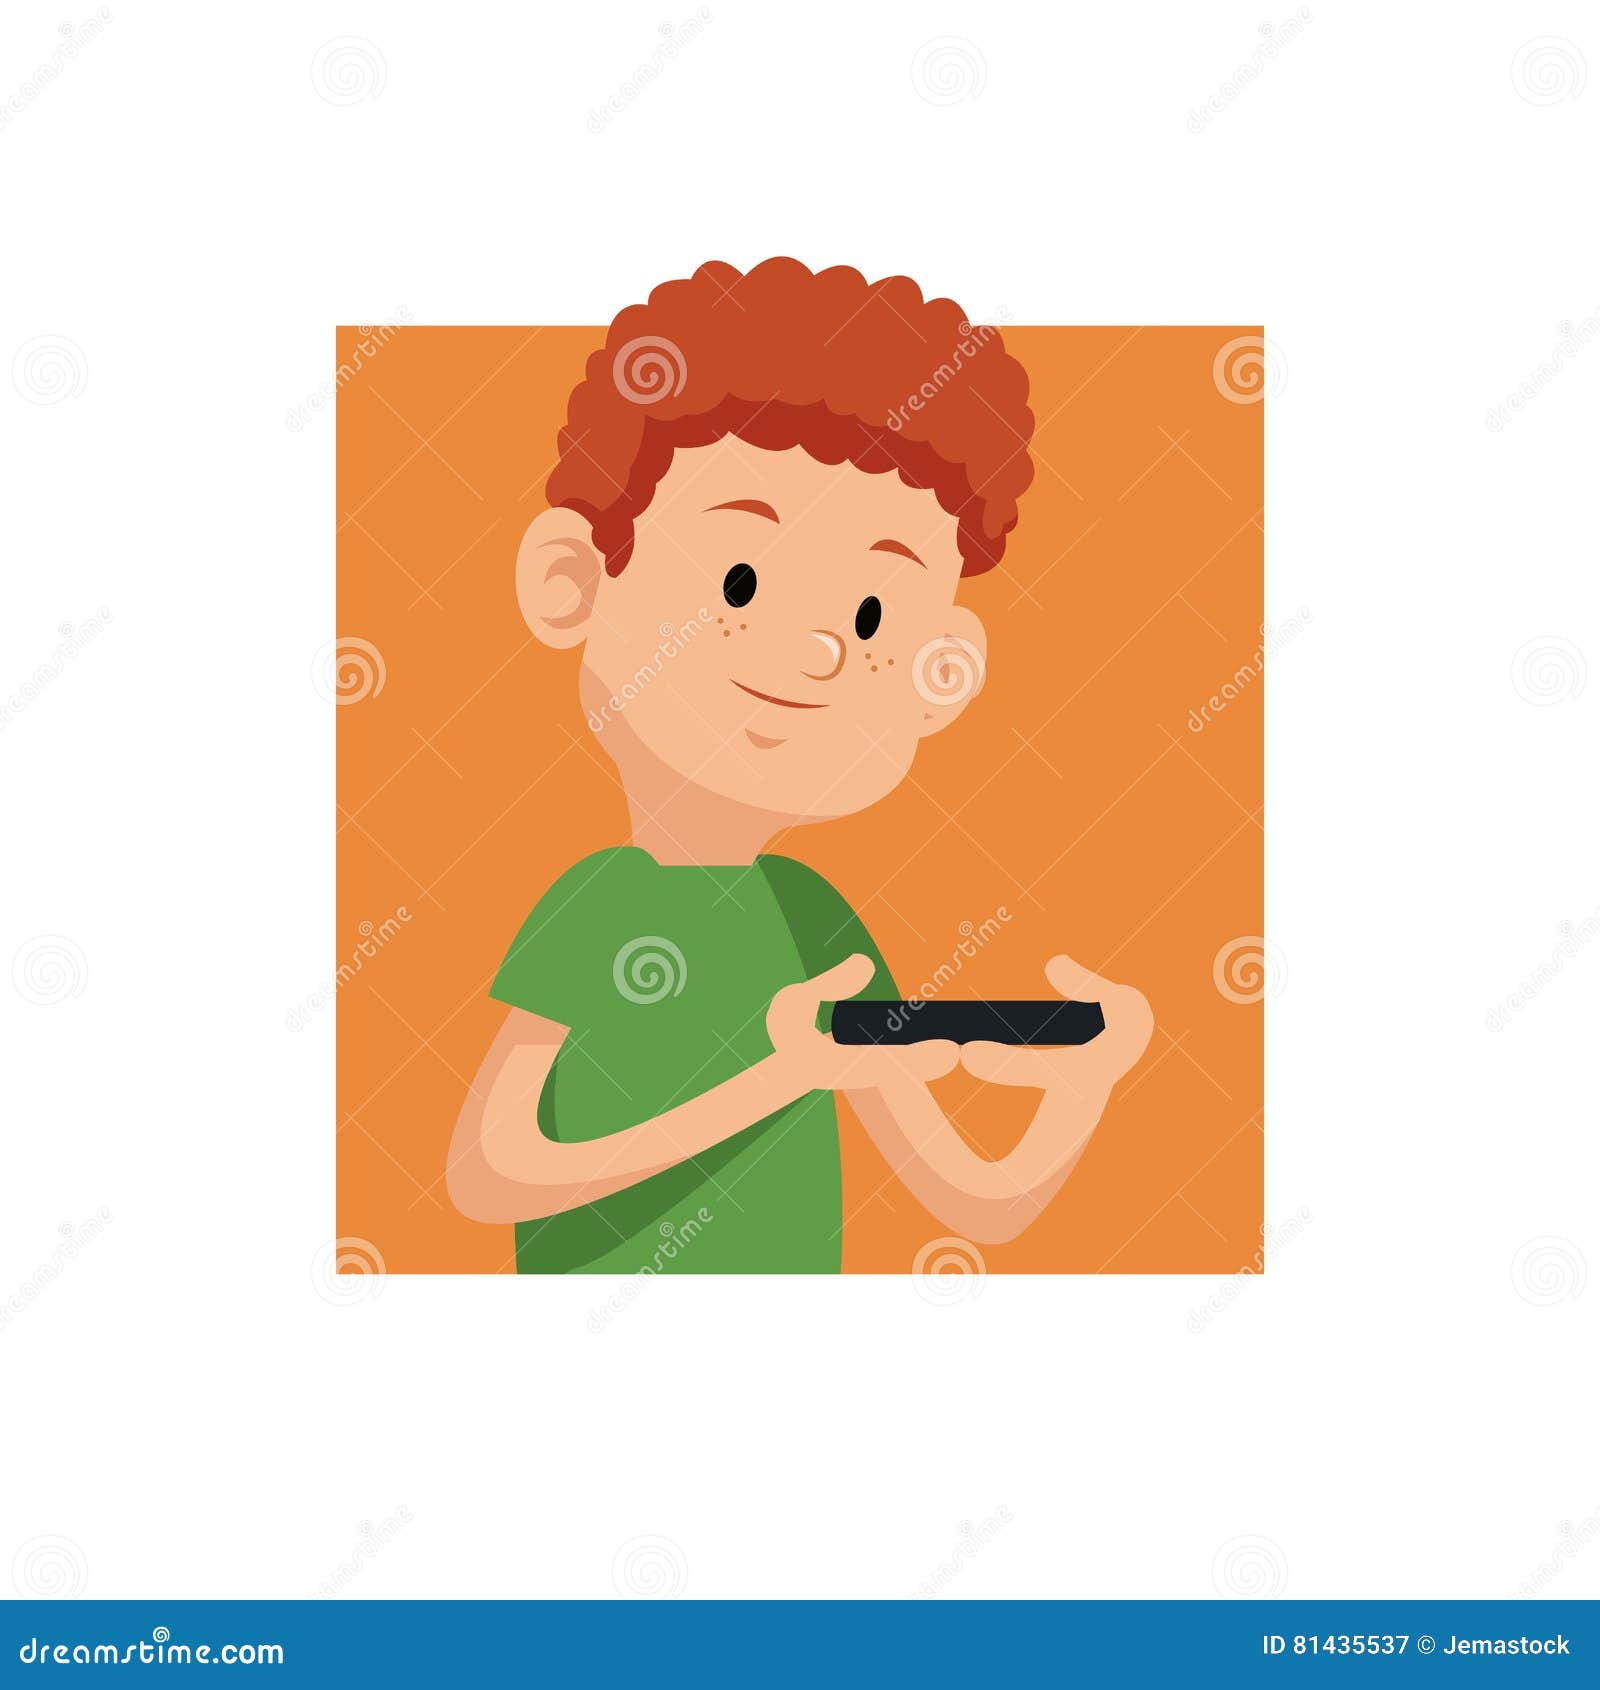 Portrait Gamer with Mobile Phone Square Orange Background Stock Vector ...